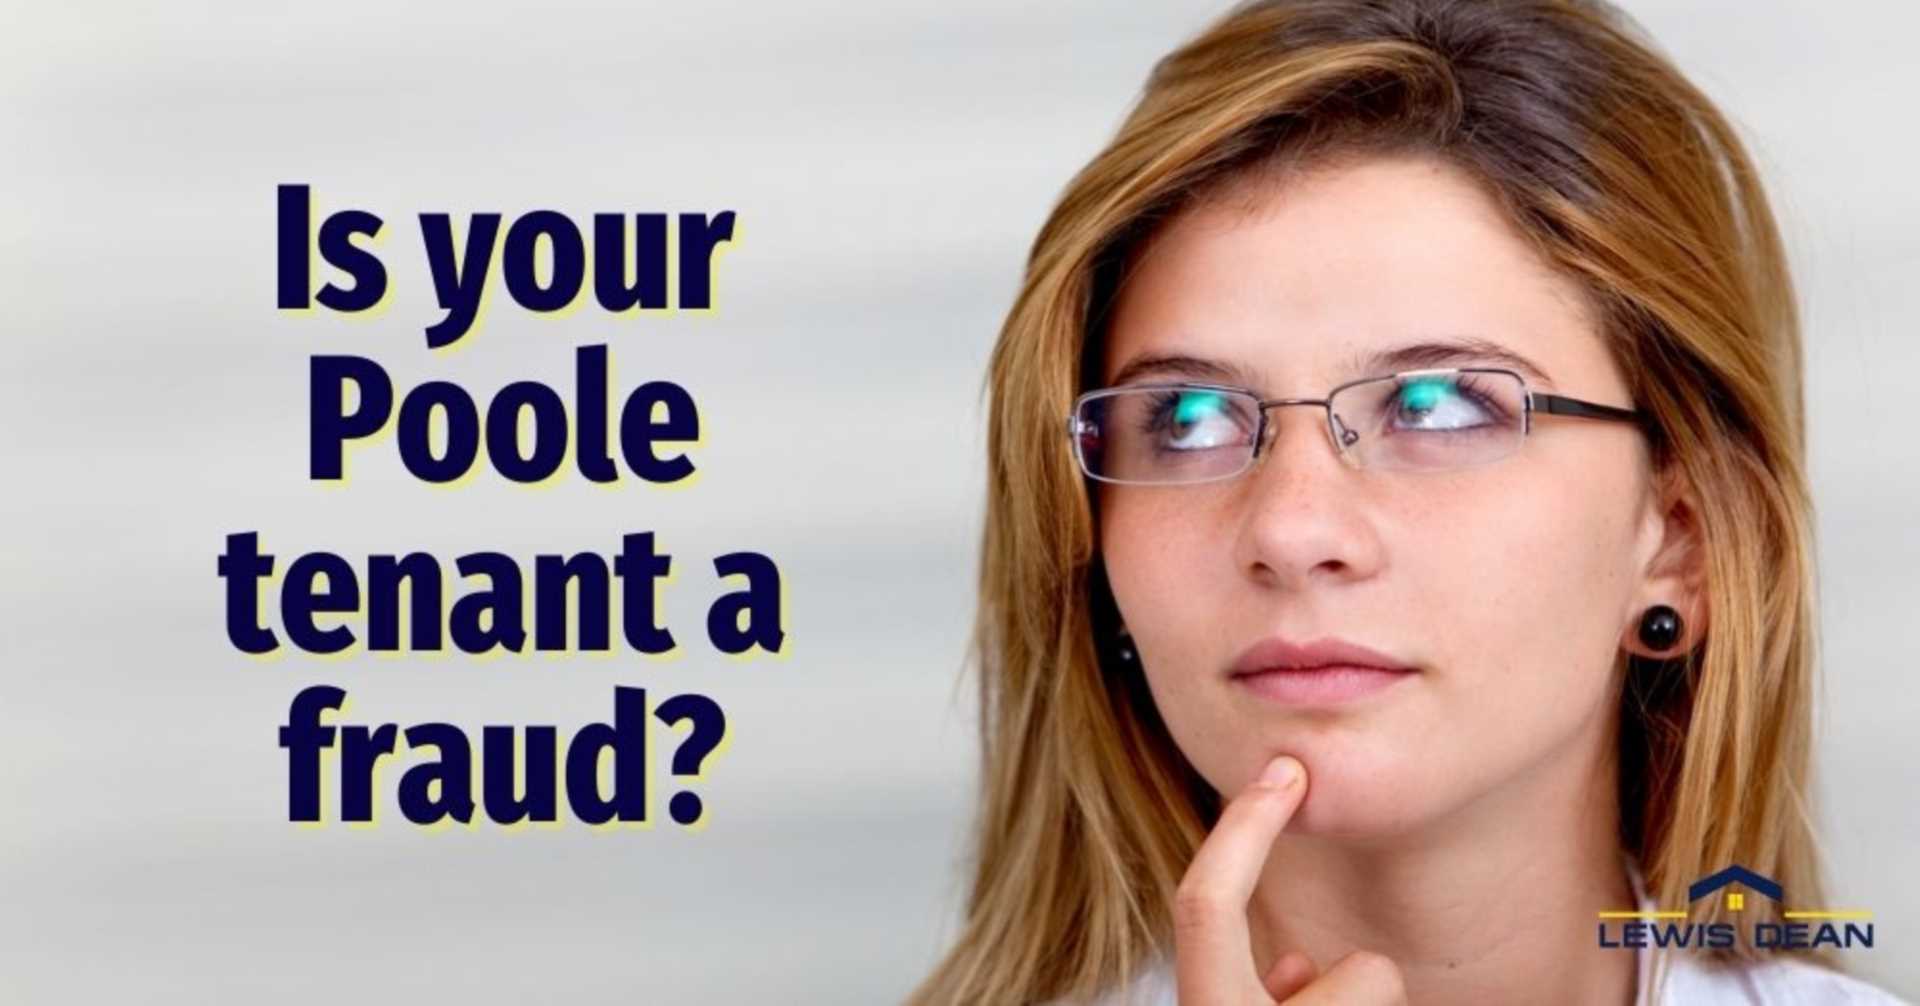 Is your Poole tenant a fraud?